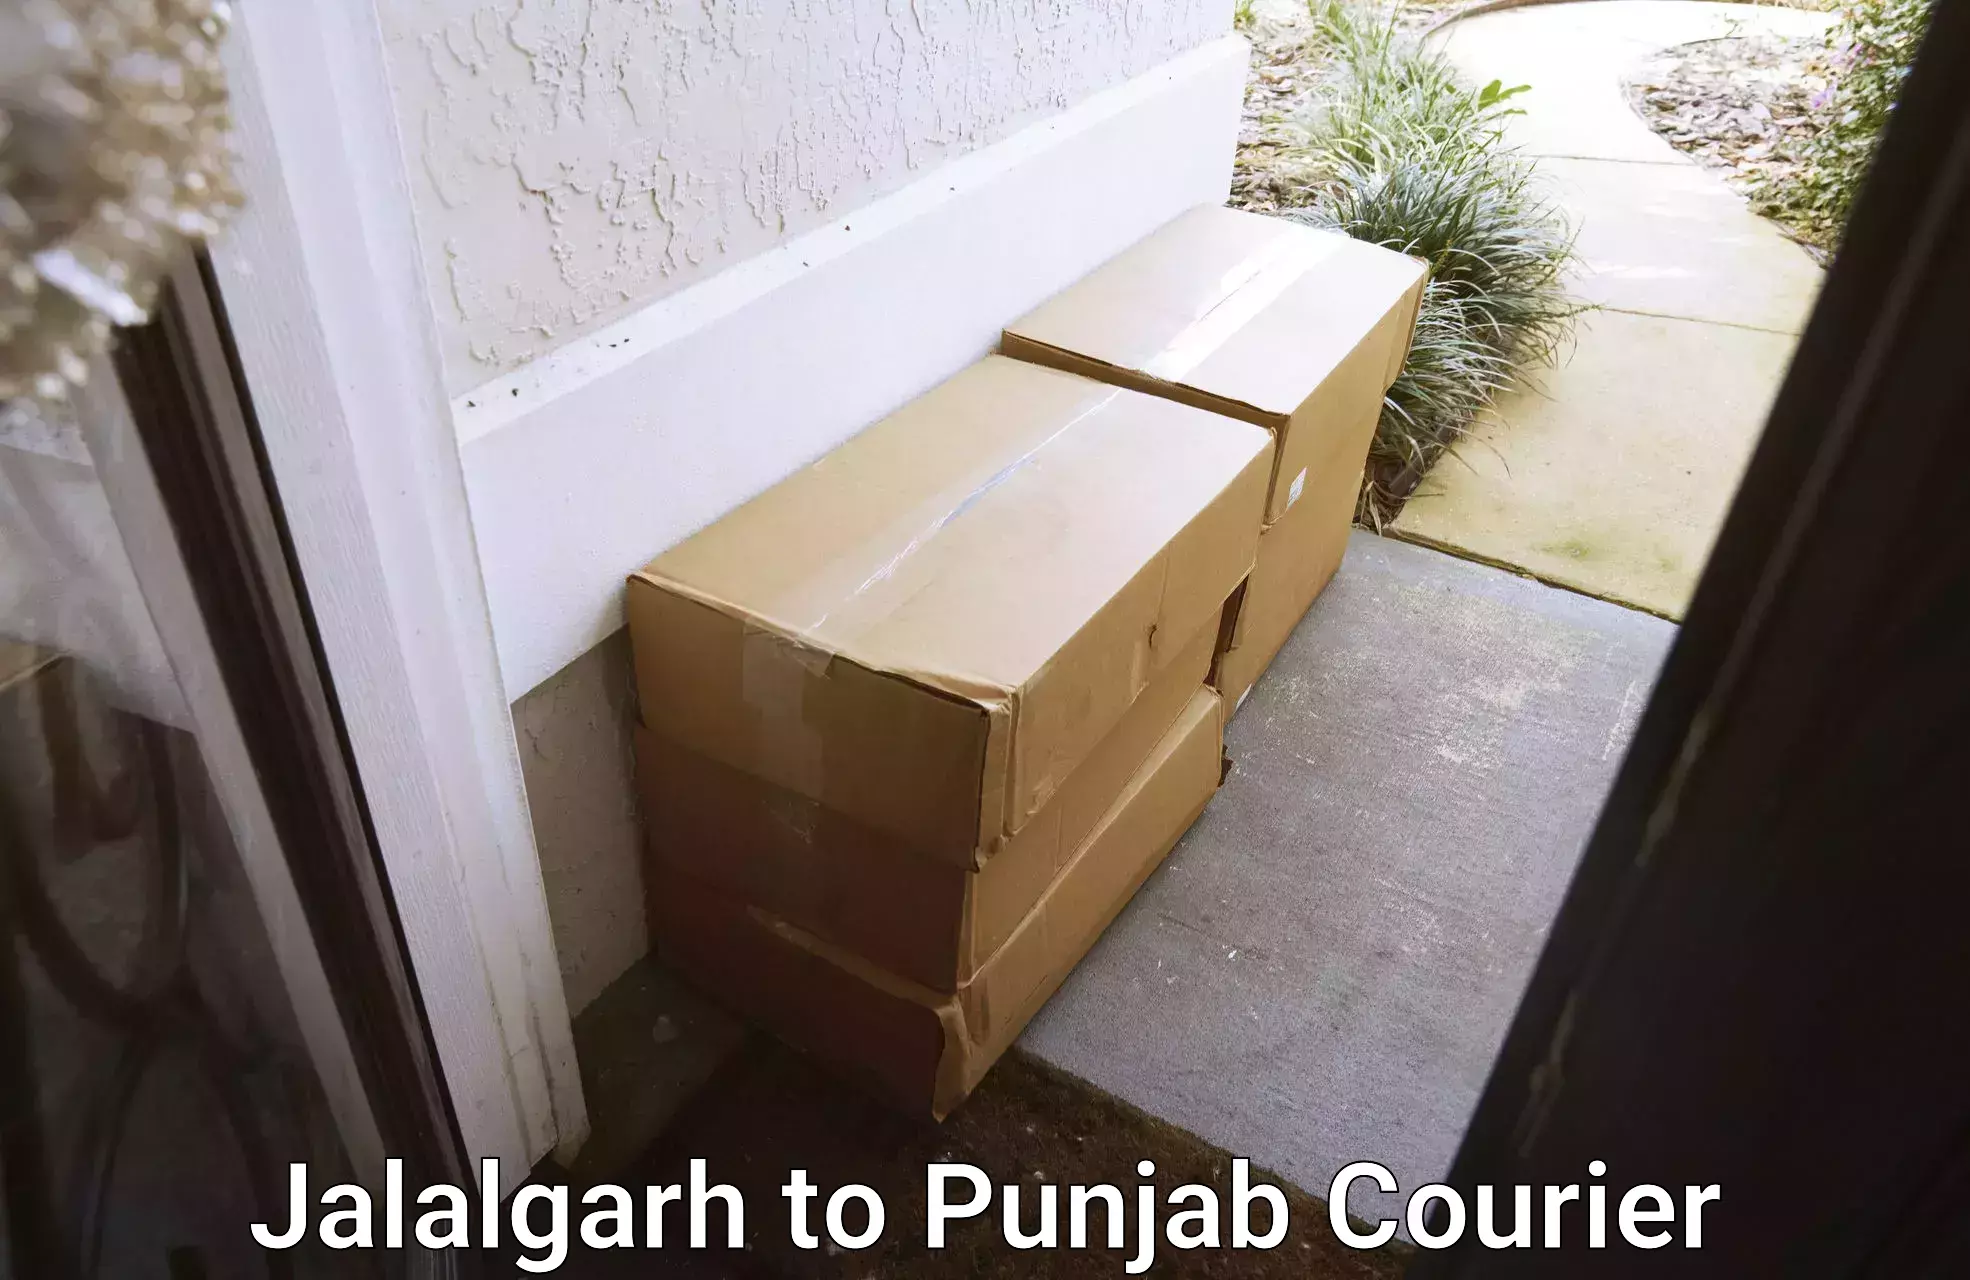 Household goods movers and packers Jalalgarh to Punjab